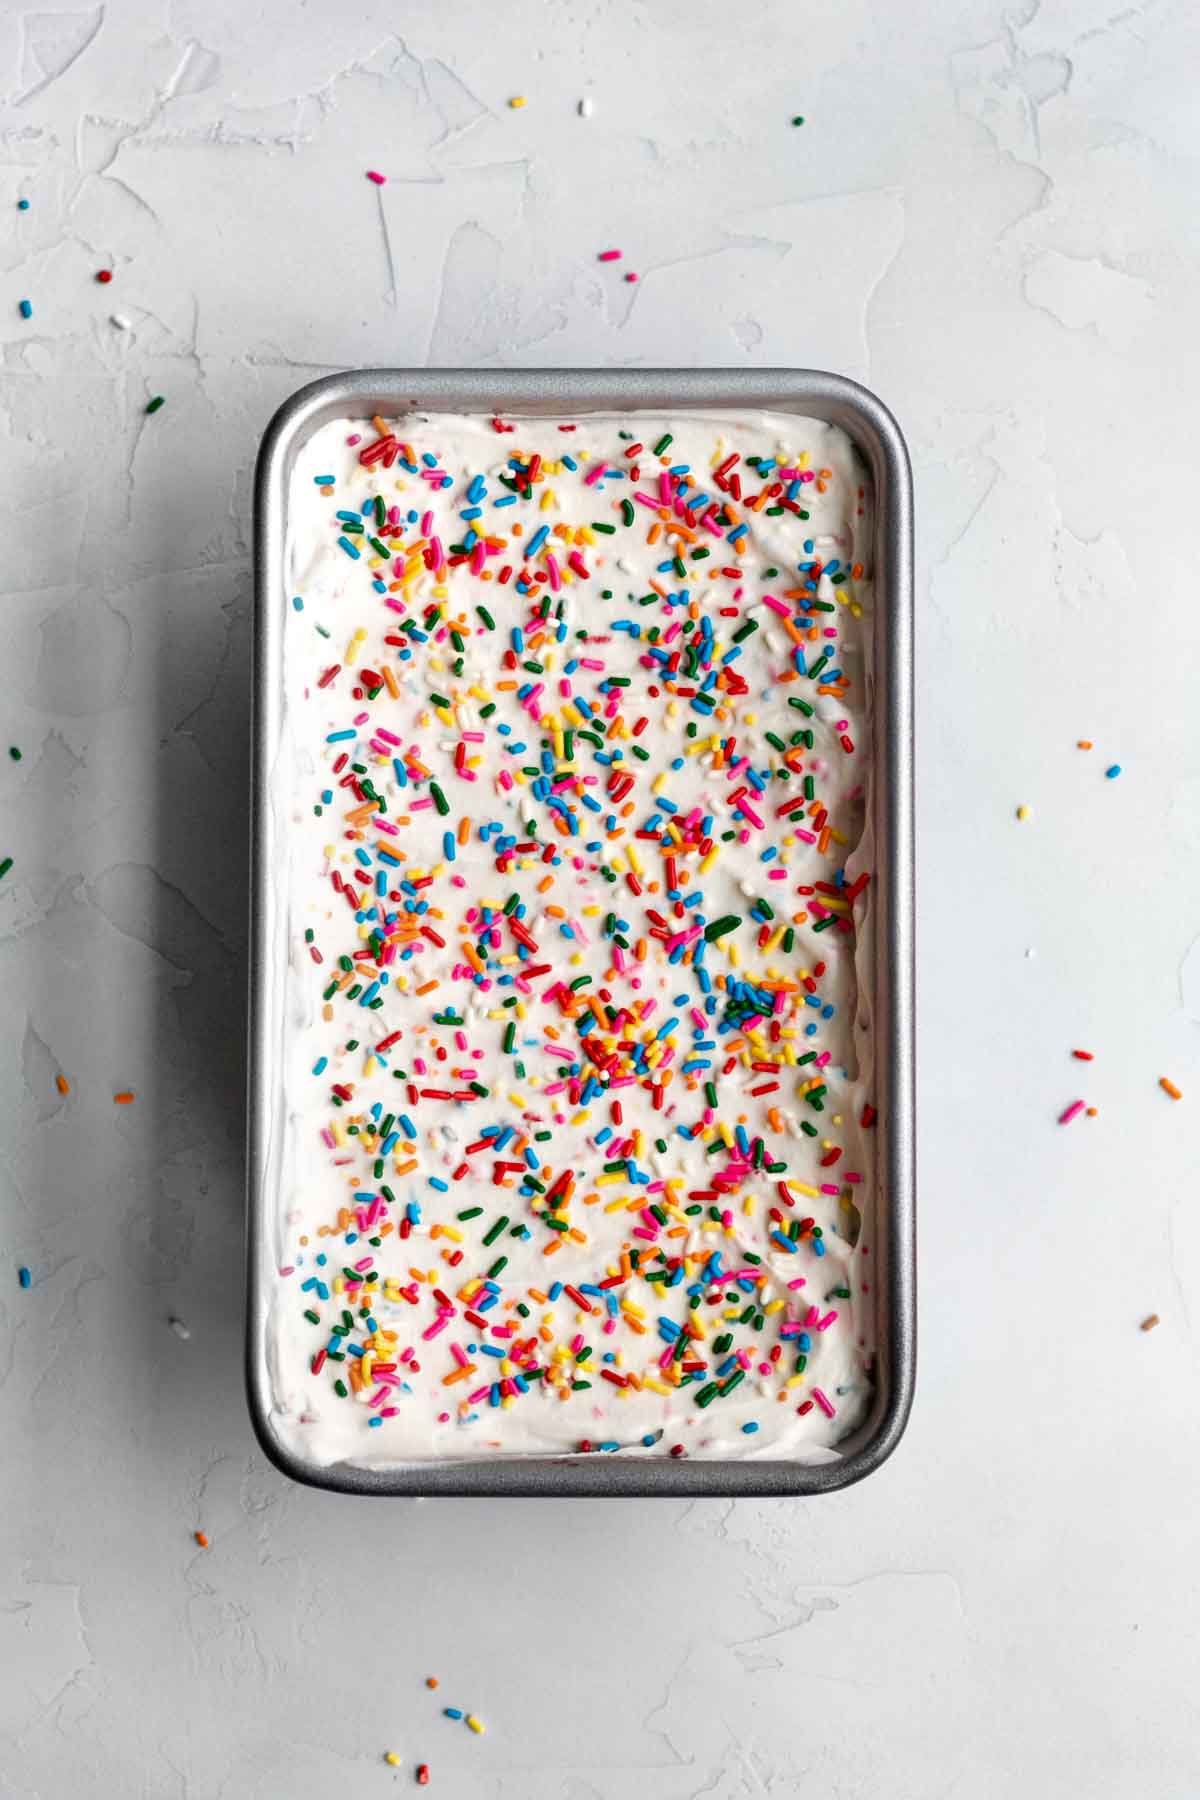 Adding extra rainbow sprinkles to the top.